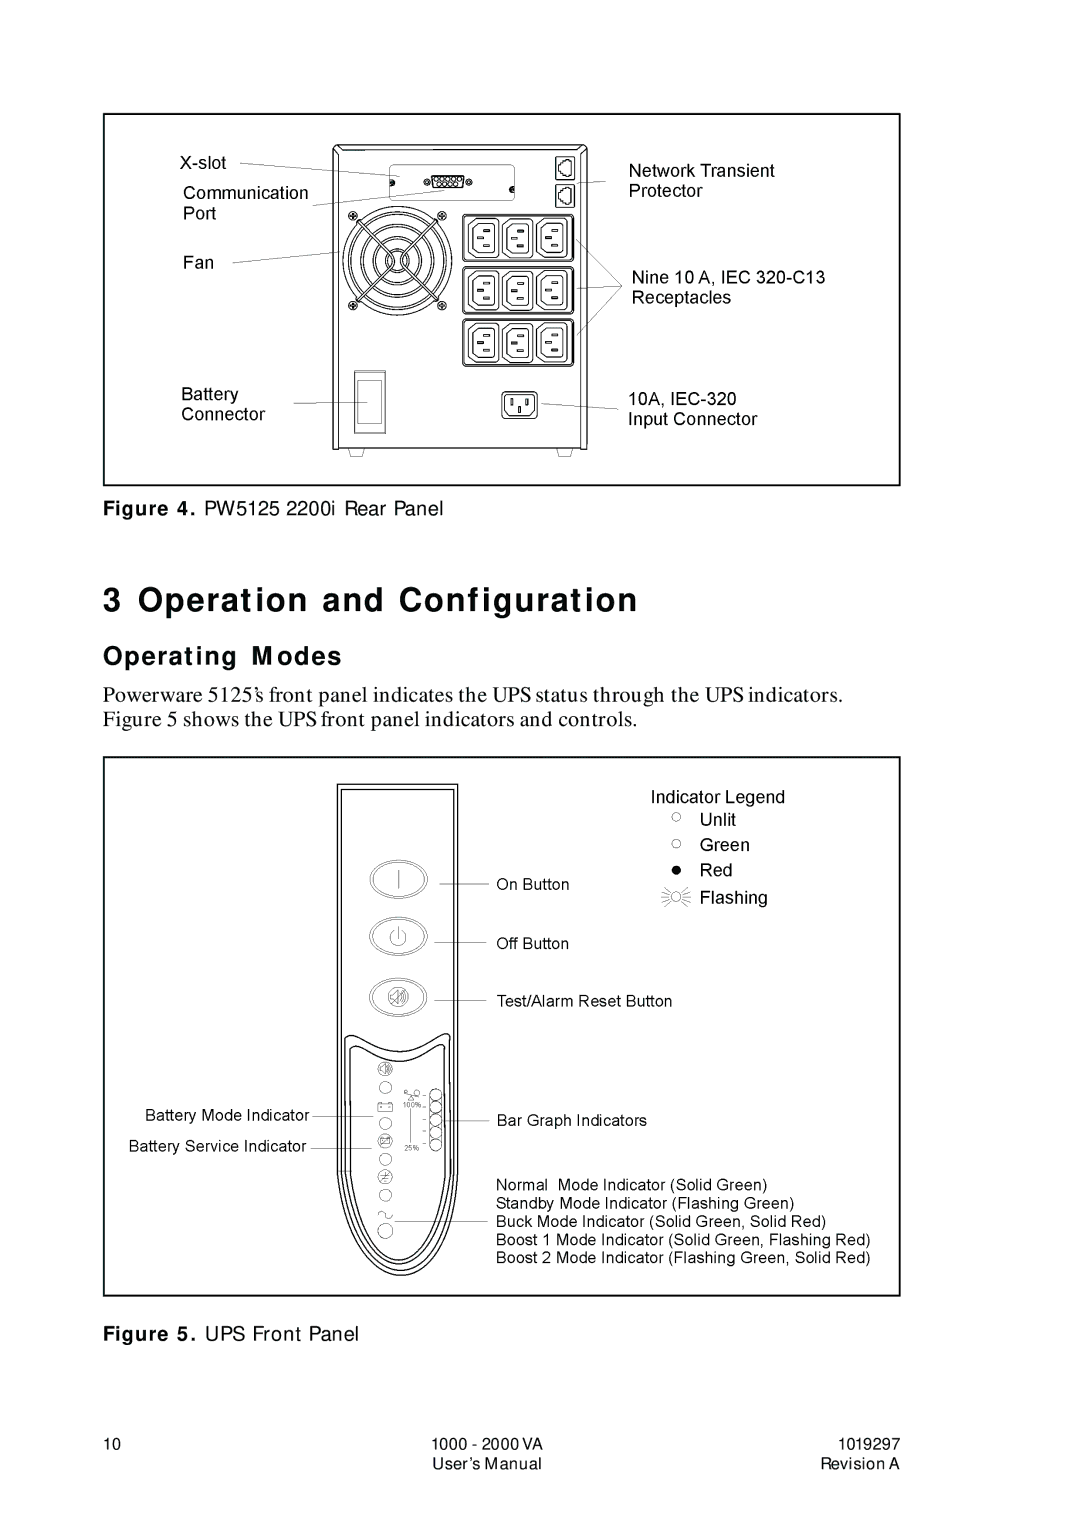 Powerware UPS 1000 - 2200 user manual Operation and Configuration, Operating Modes 